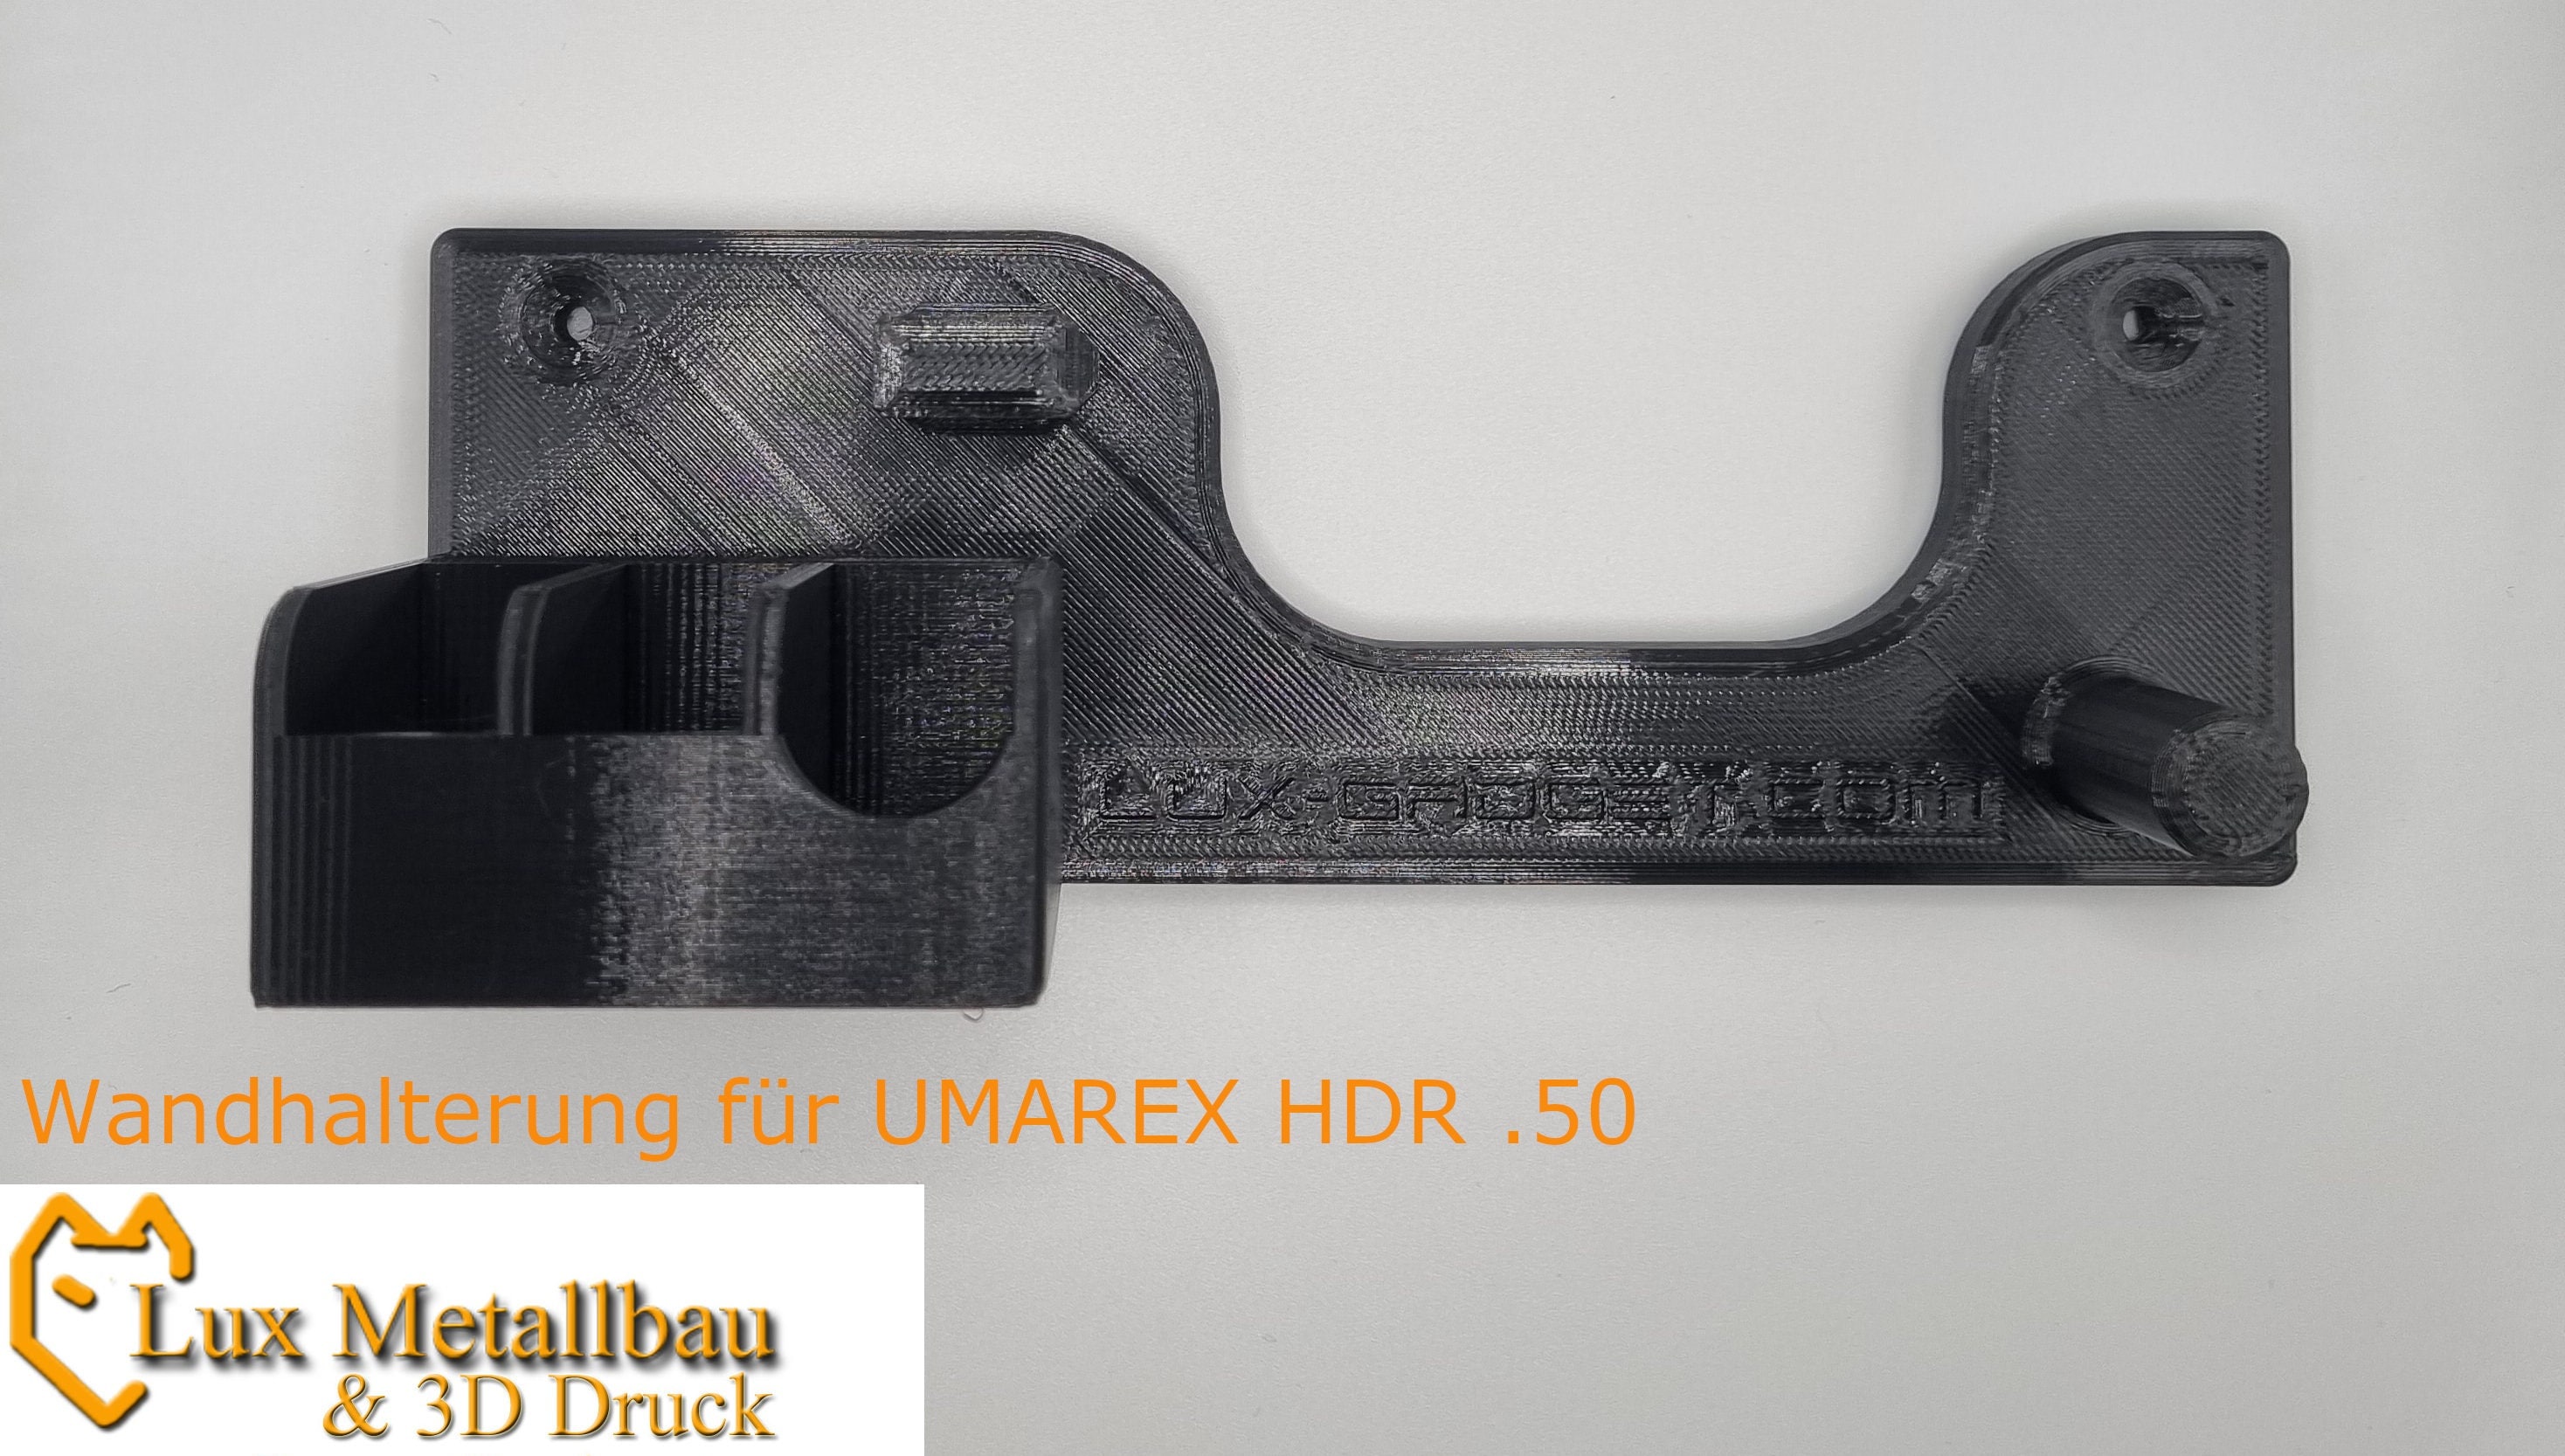 UMAREX HDR 50 Wall Mount - Front/Side